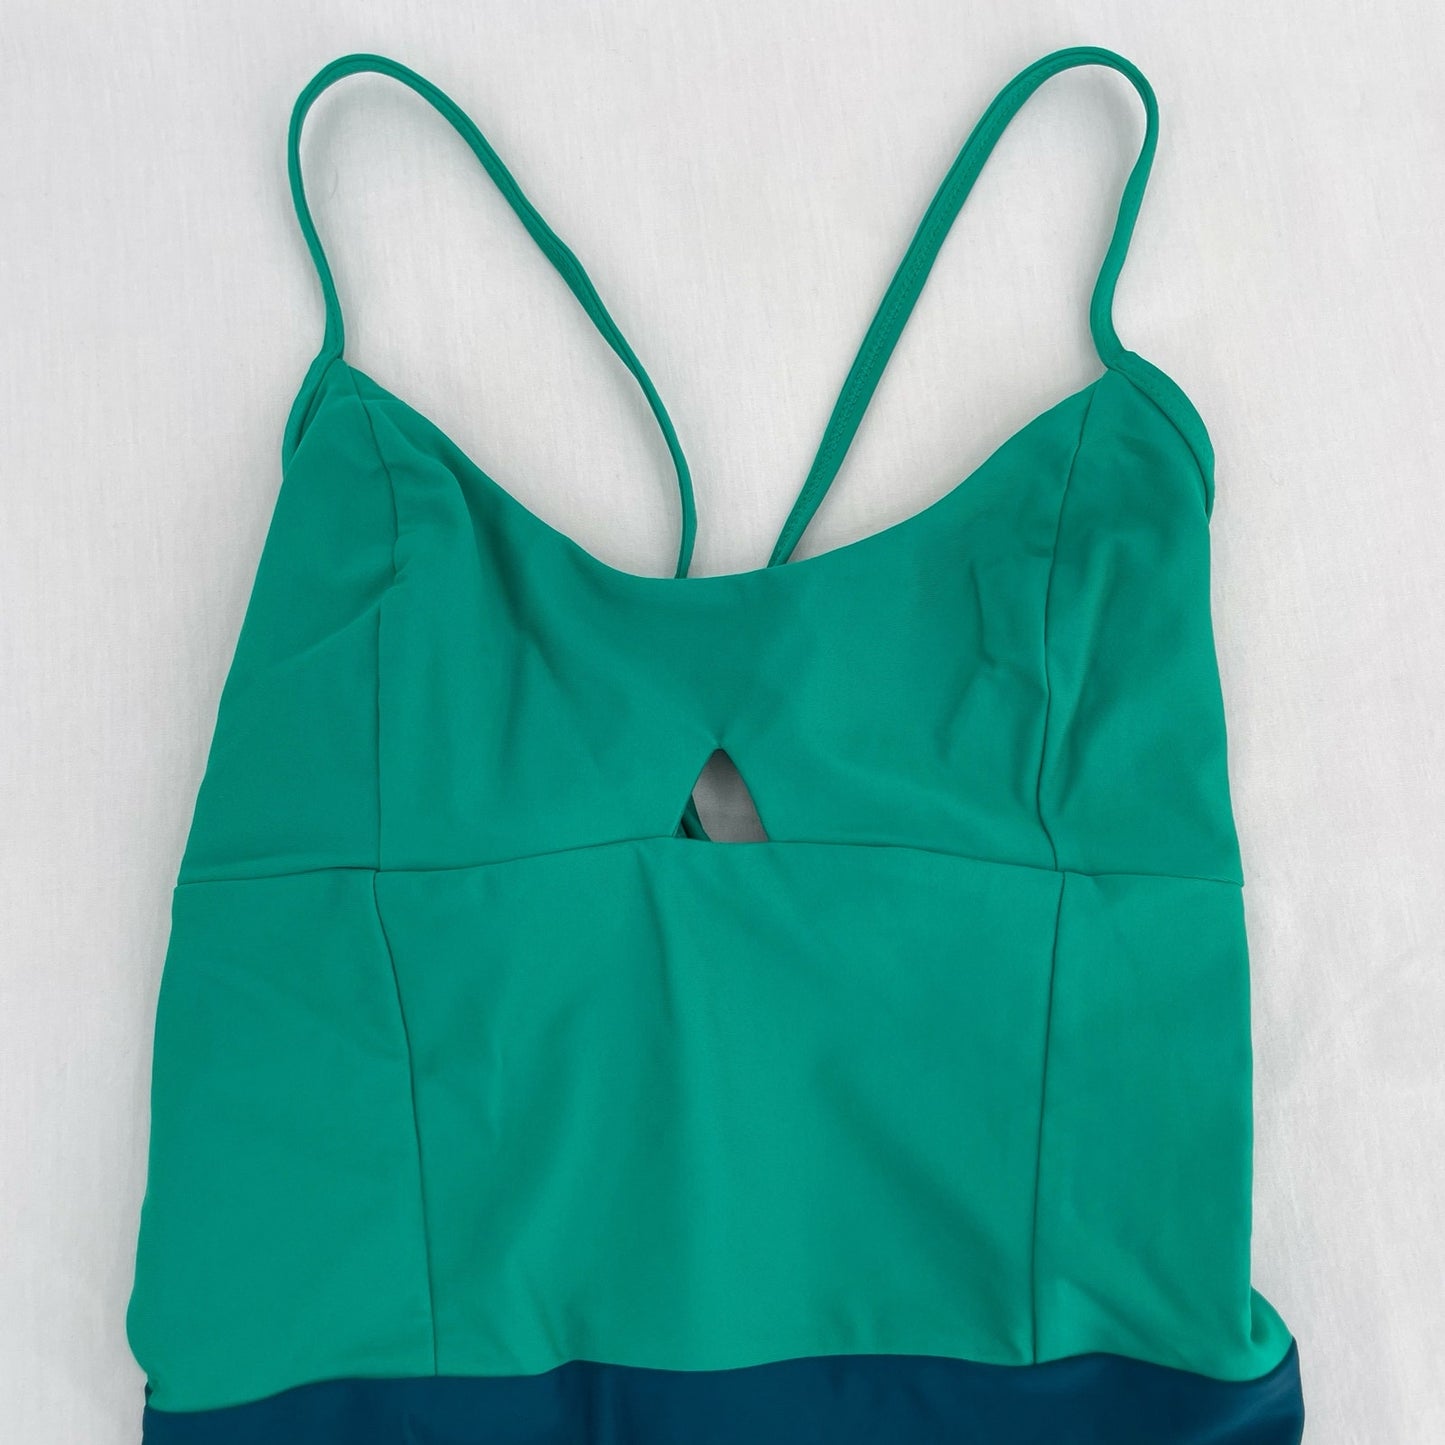 Summersalt The Swan Dive Green Teal Seaglass Seaweed Keyhole One Piece Swimsuit, Size 2